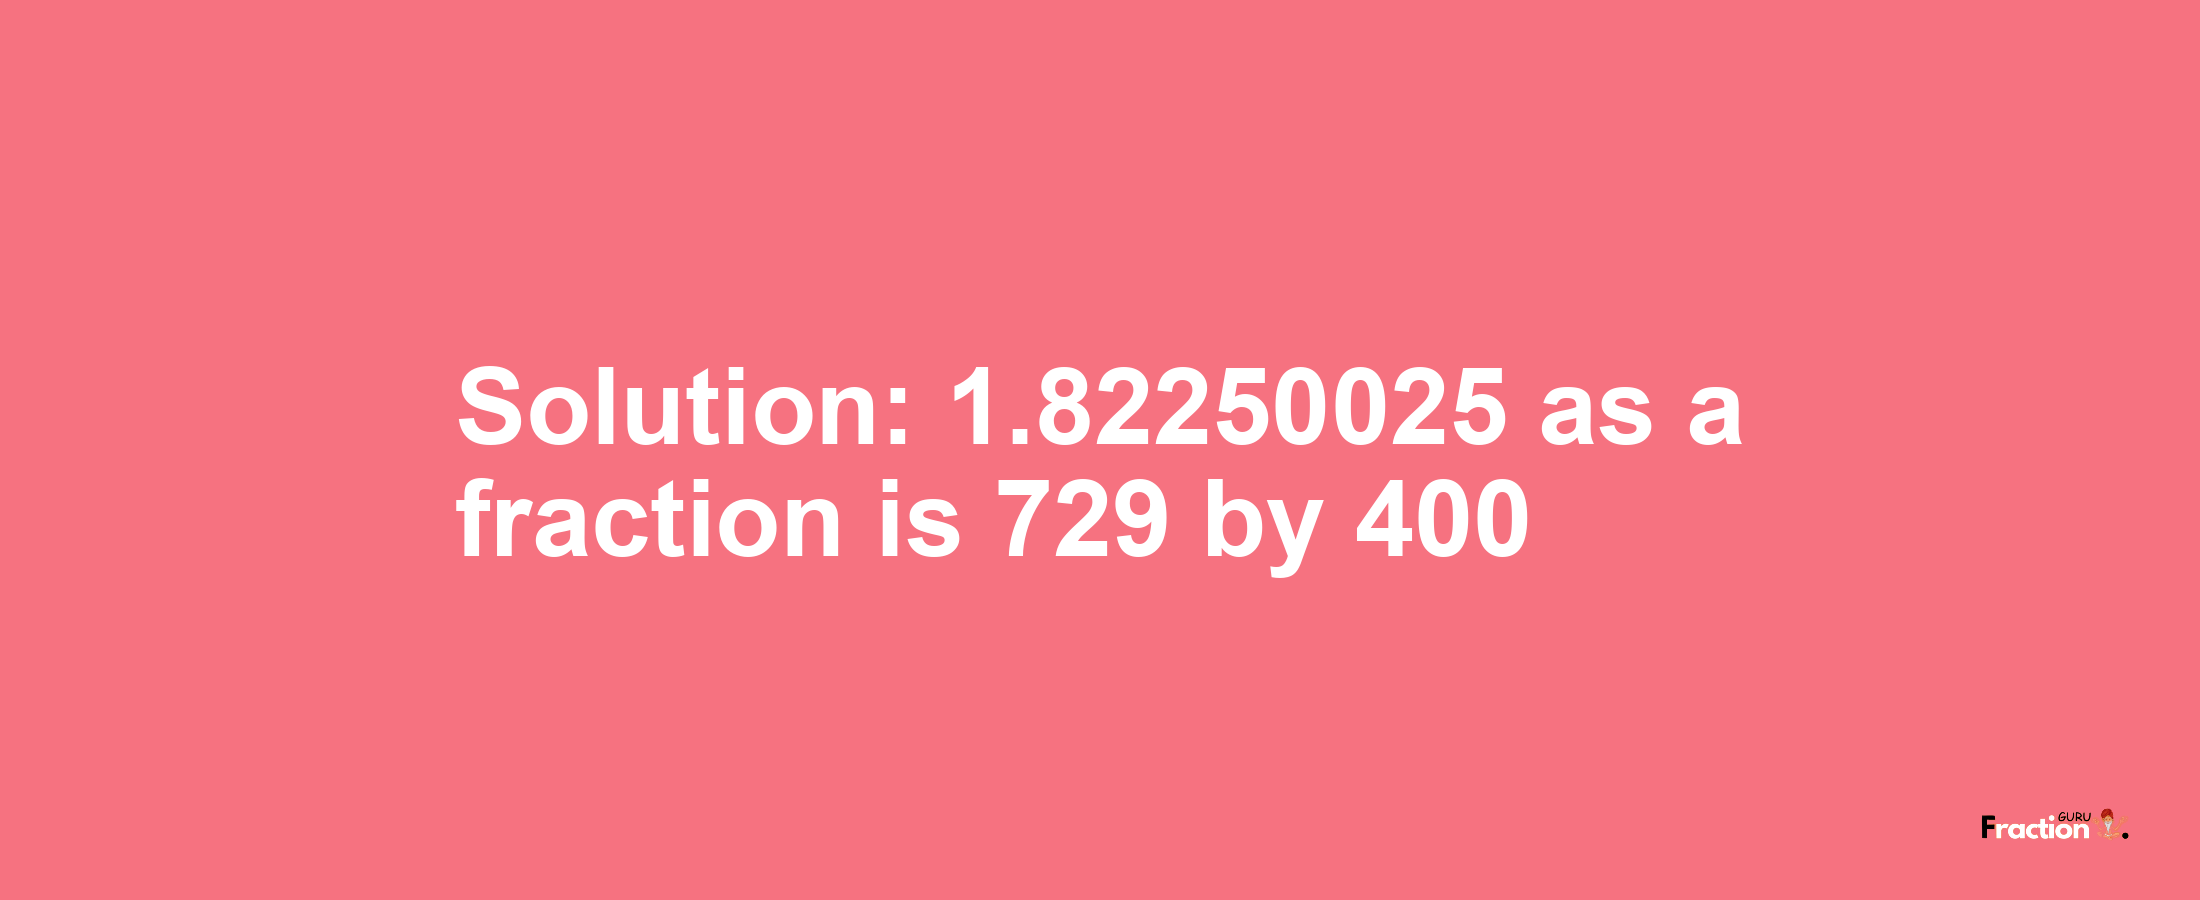 Solution:1.82250025 as a fraction is 729/400